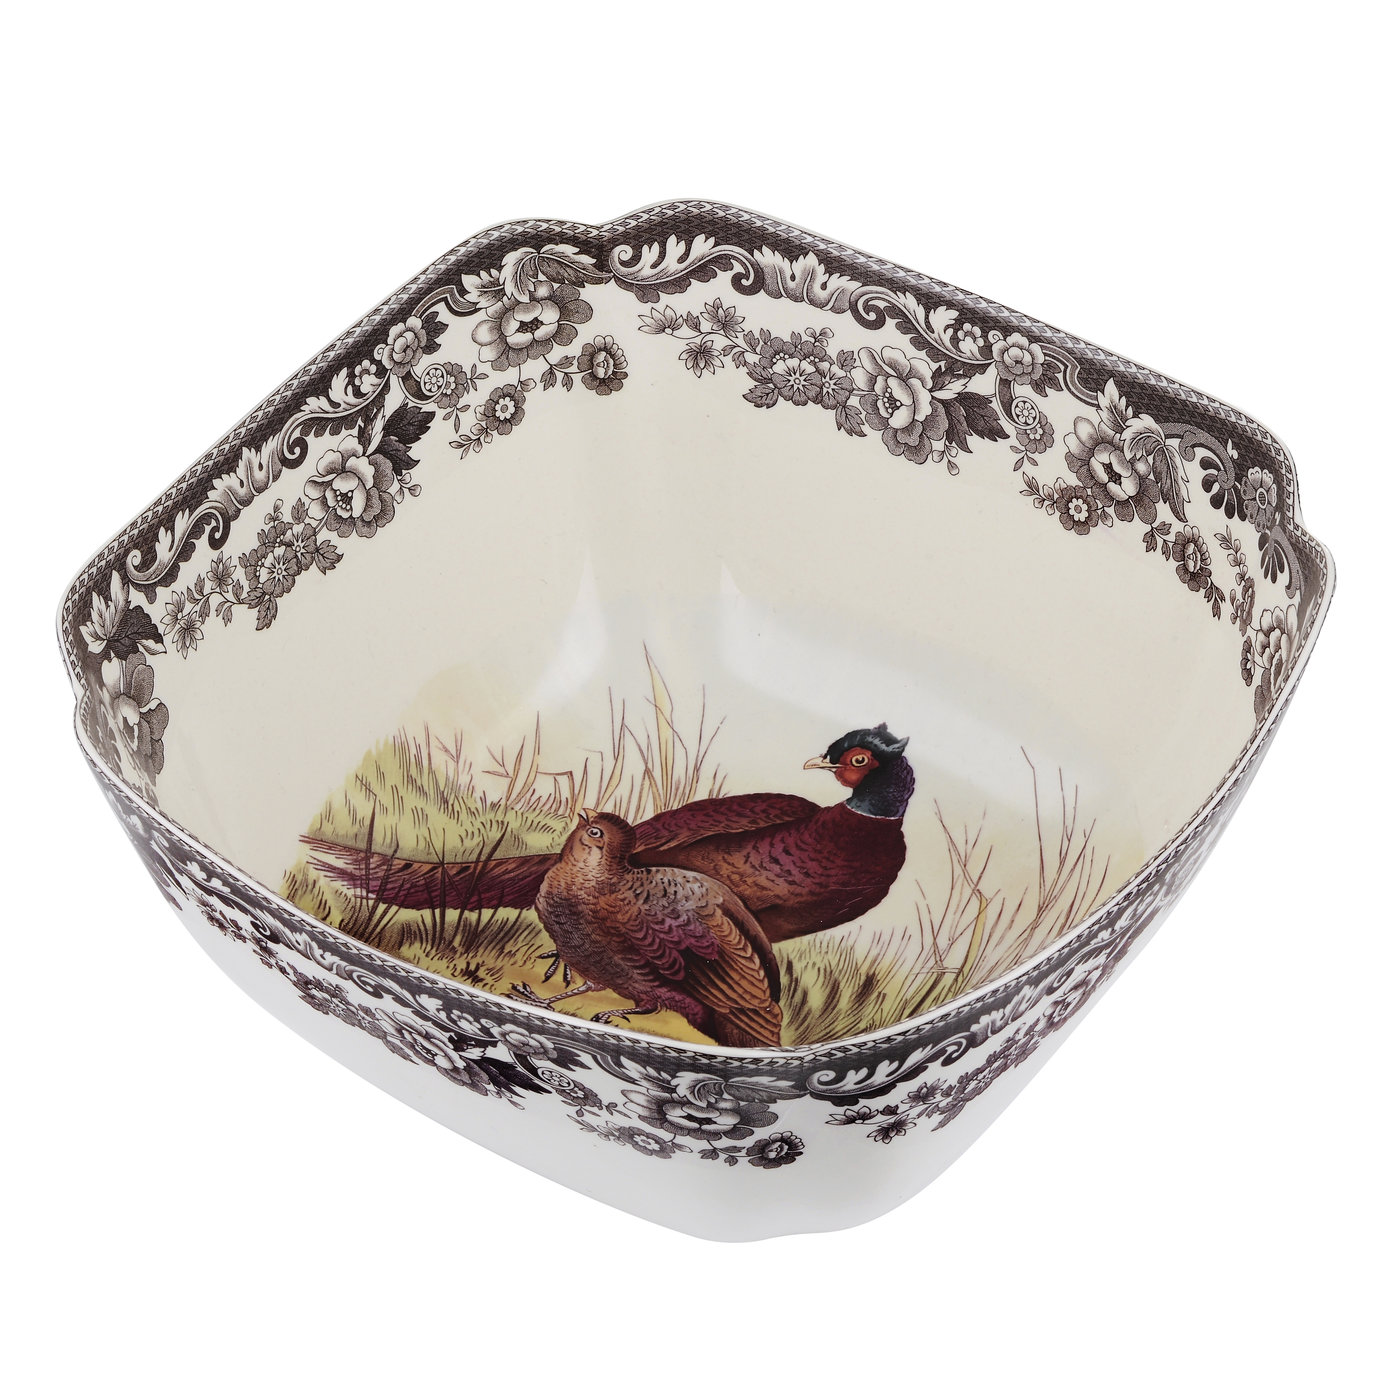 Woodland Deep Square Serving Bowl 9.5 Inch, Pheasant image number null